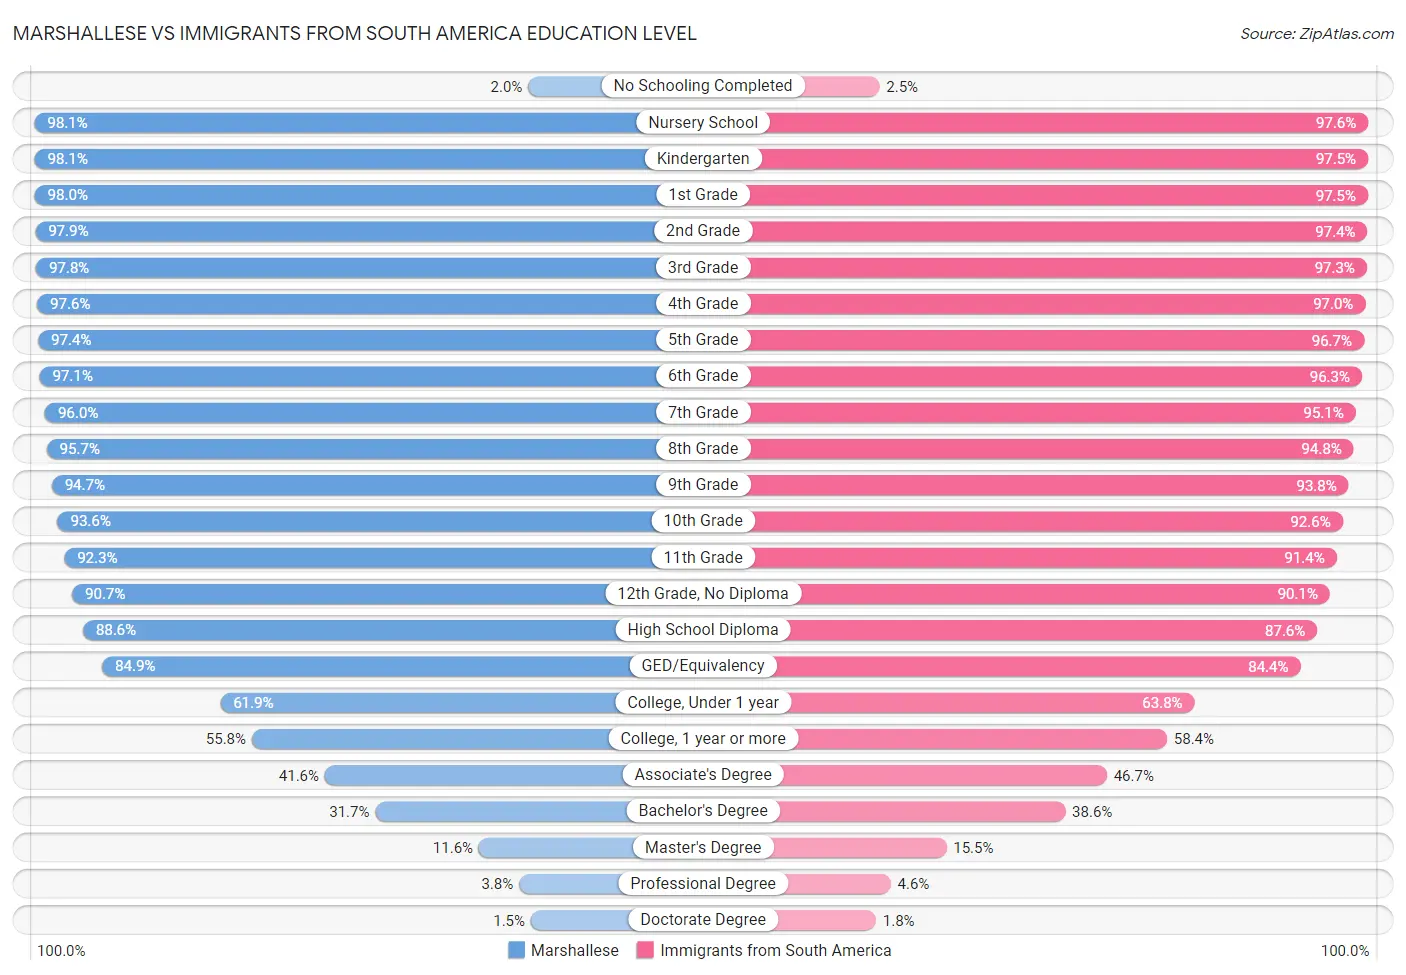 Marshallese vs Immigrants from South America Education Level